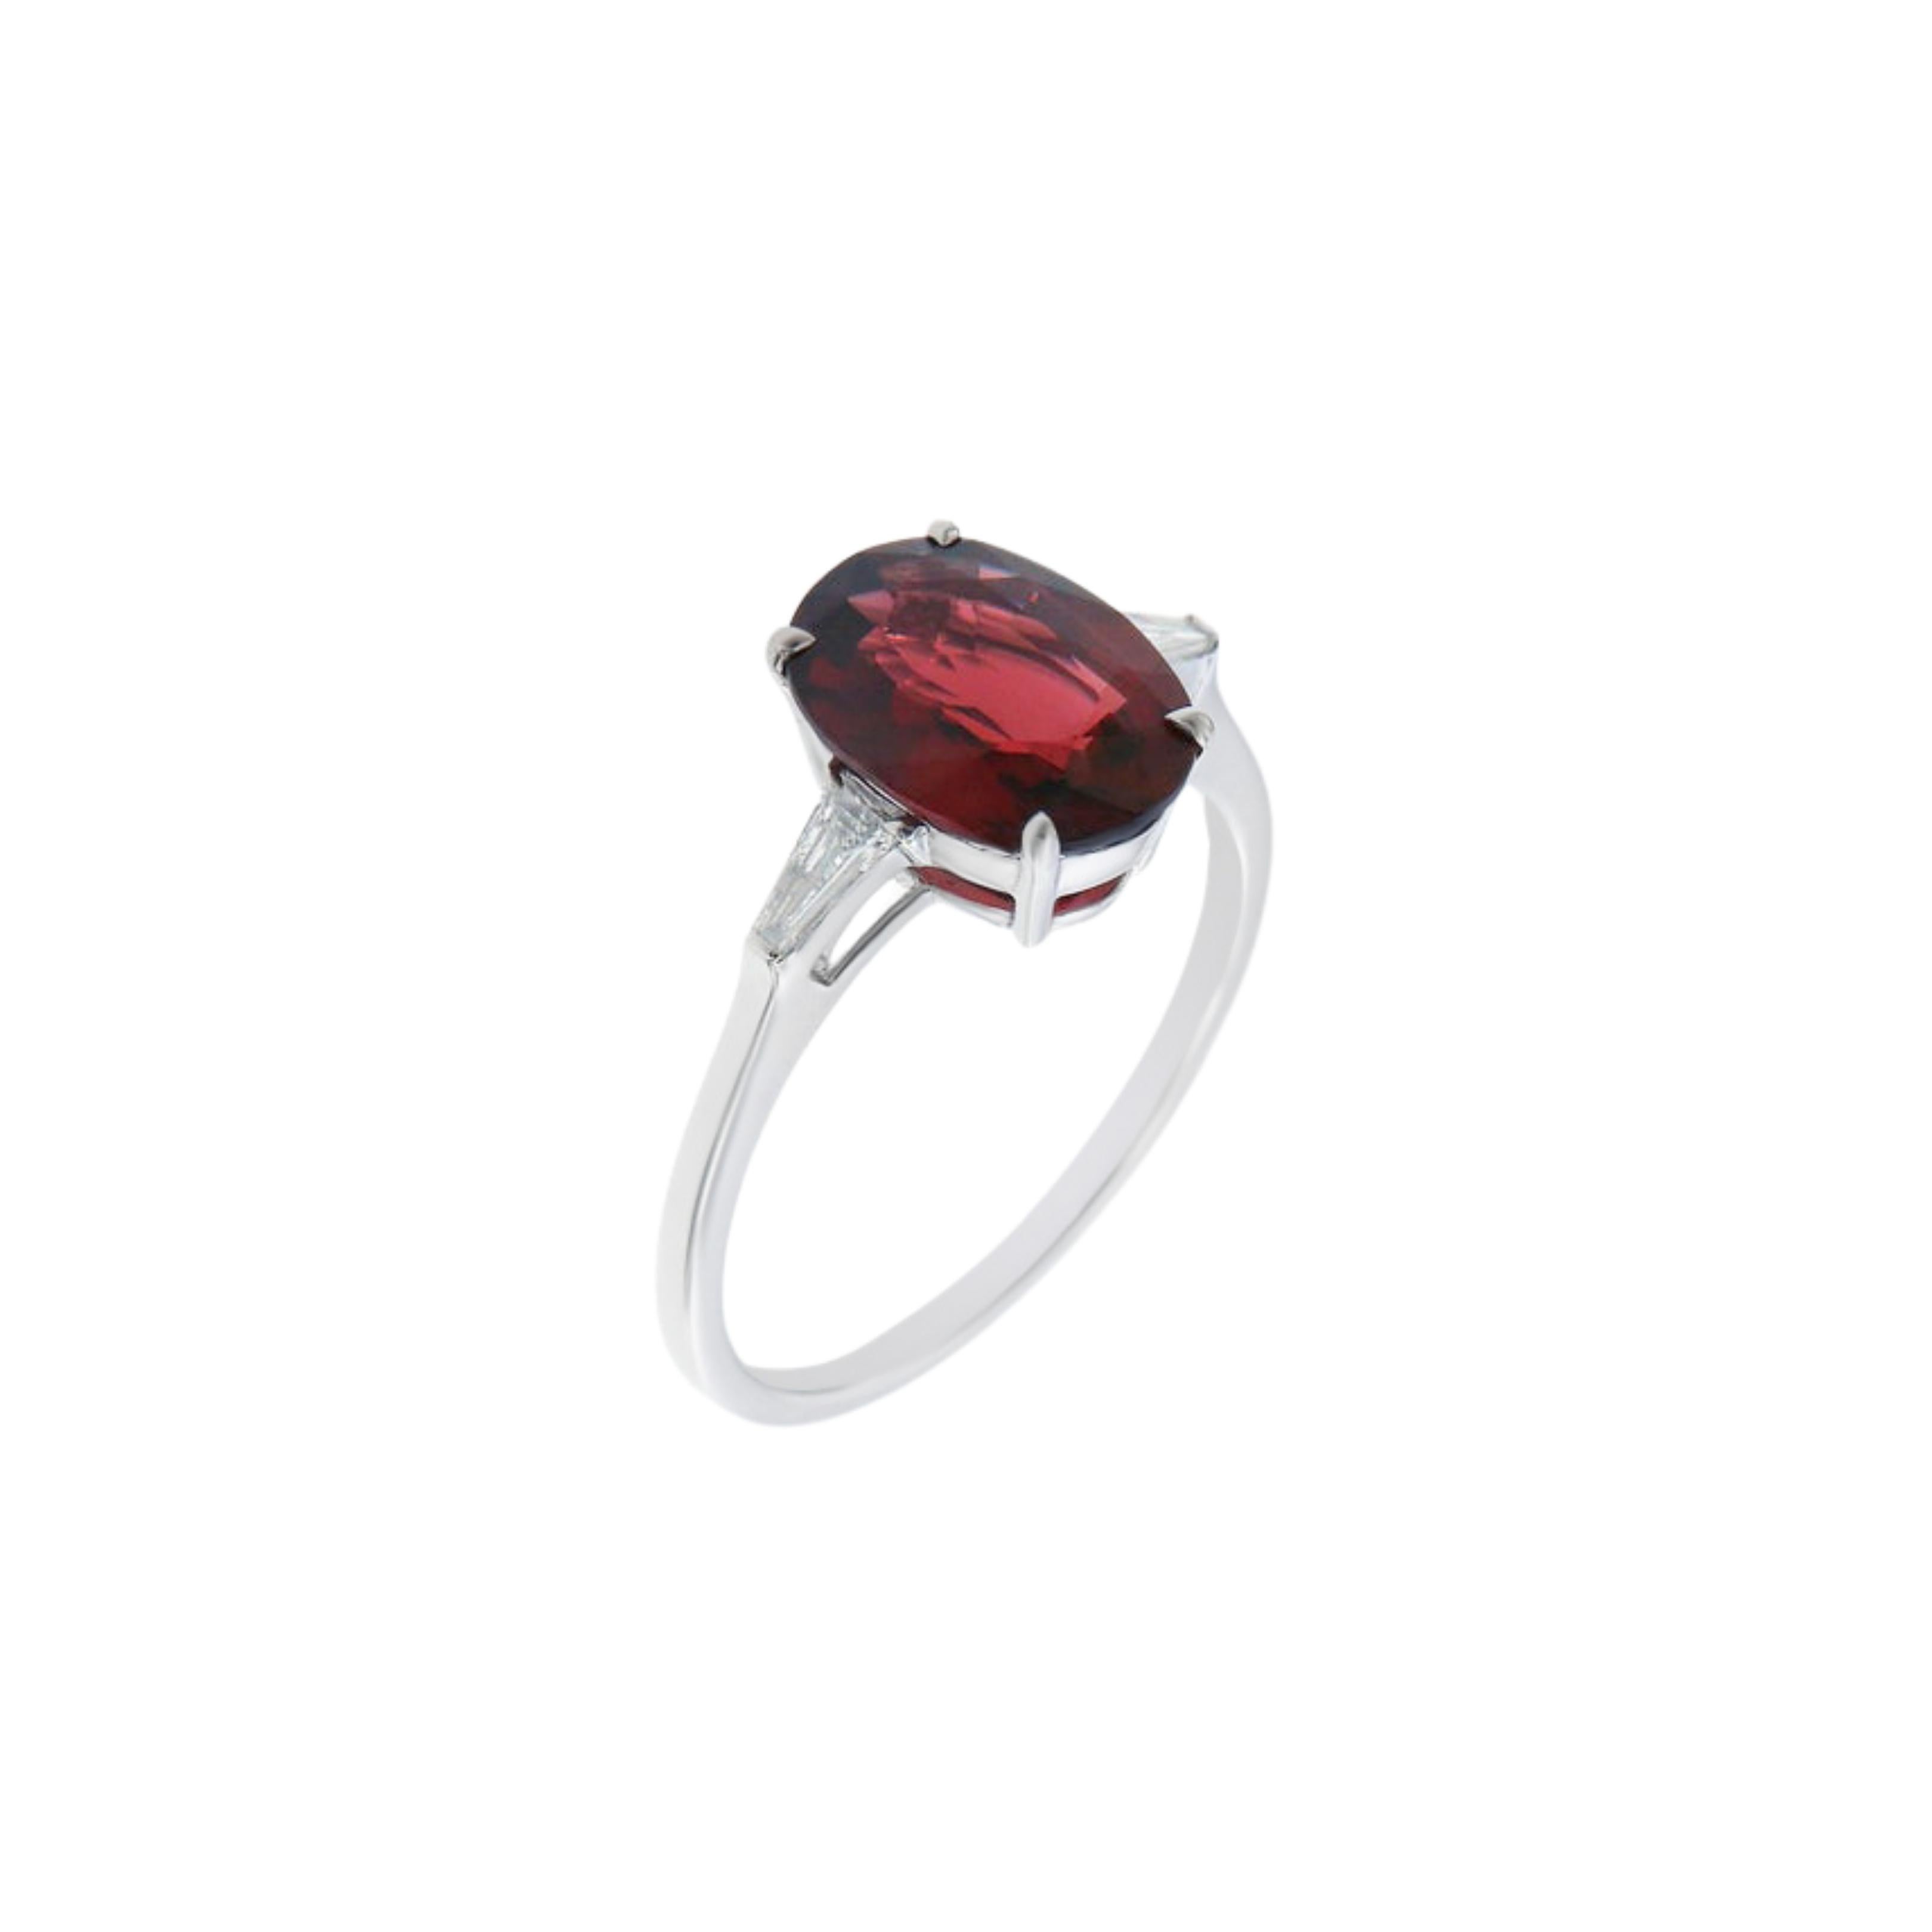 This beautiful Oval Red Spinel is a natural non heated 2.48ct stone. Beautifully set with accent tapered baguette diamonds in G VVS quality and set in high polish 18k white gold. 

Ring Size
EU 52 
USA 6

This ring can be resized for the customer